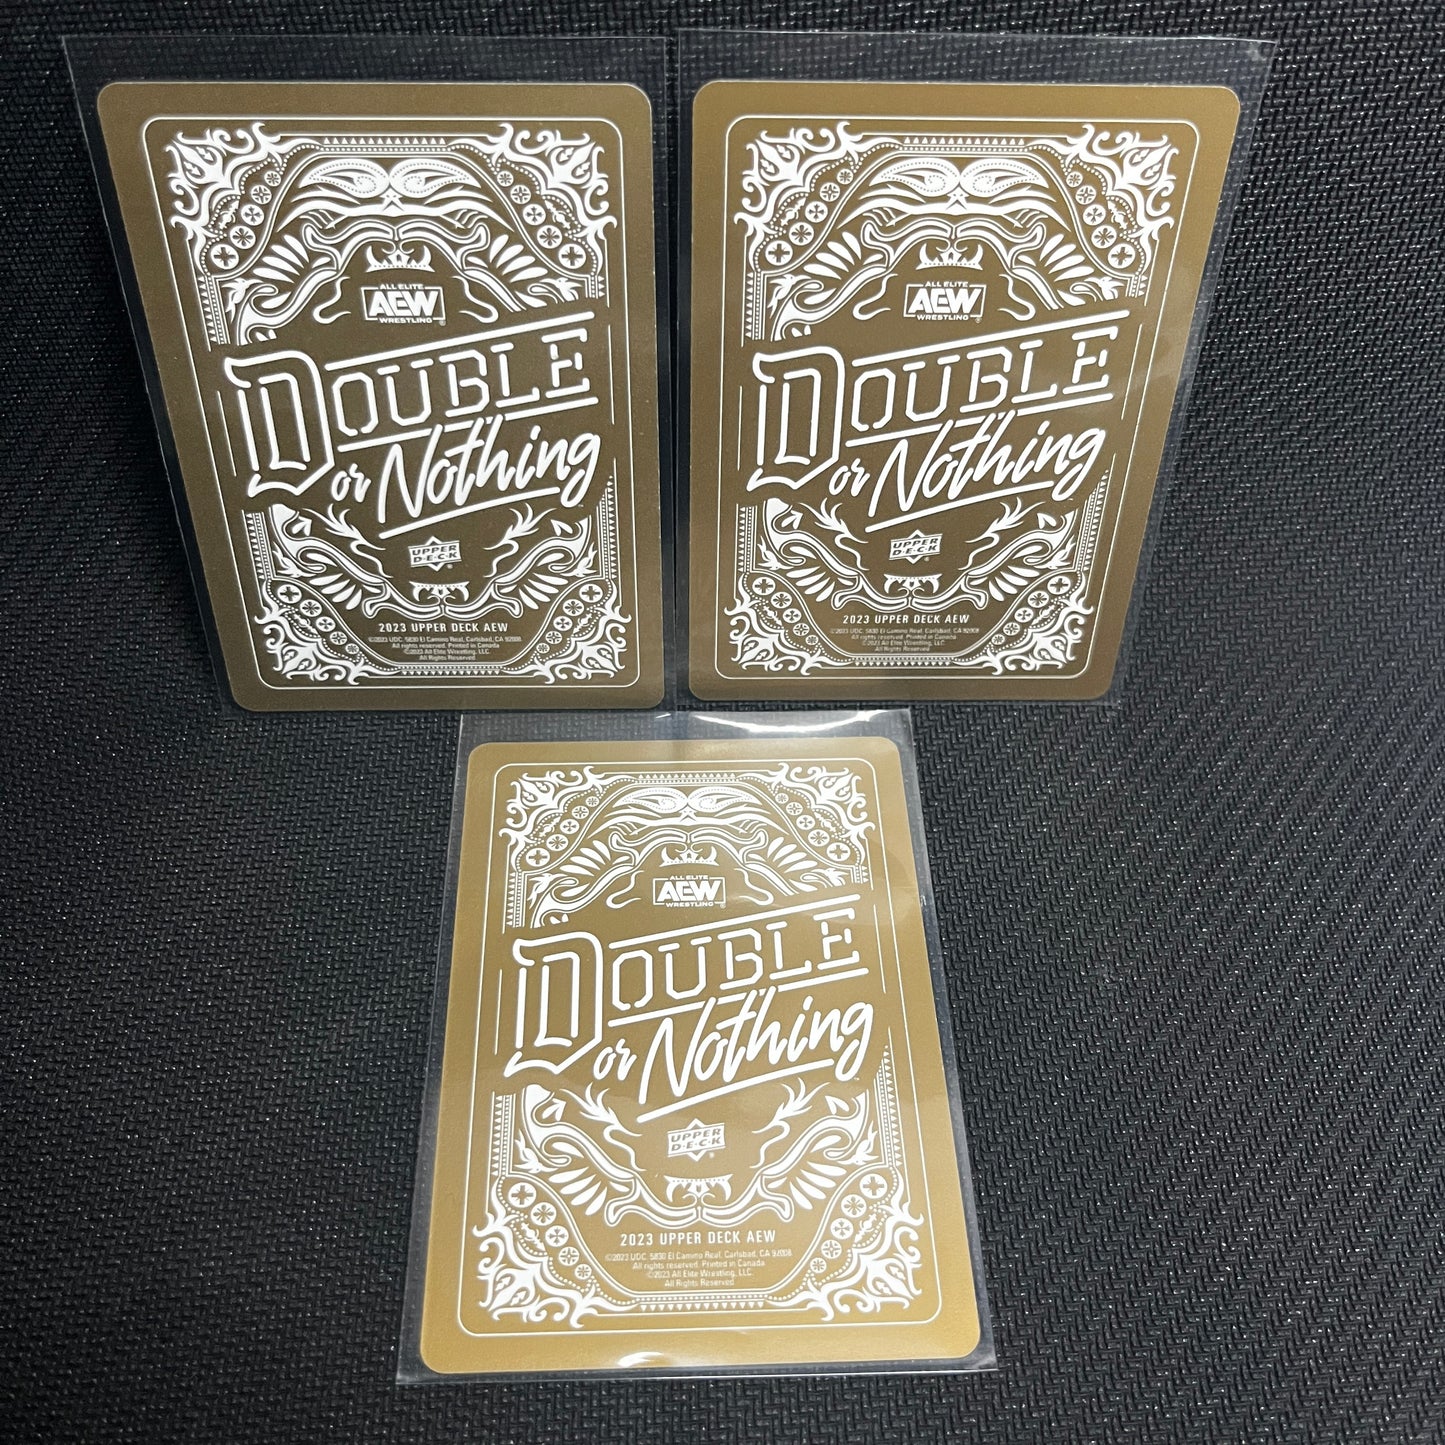 AEW Gold Playing Card Lot - Darby Allin/Christian Cage/Penta